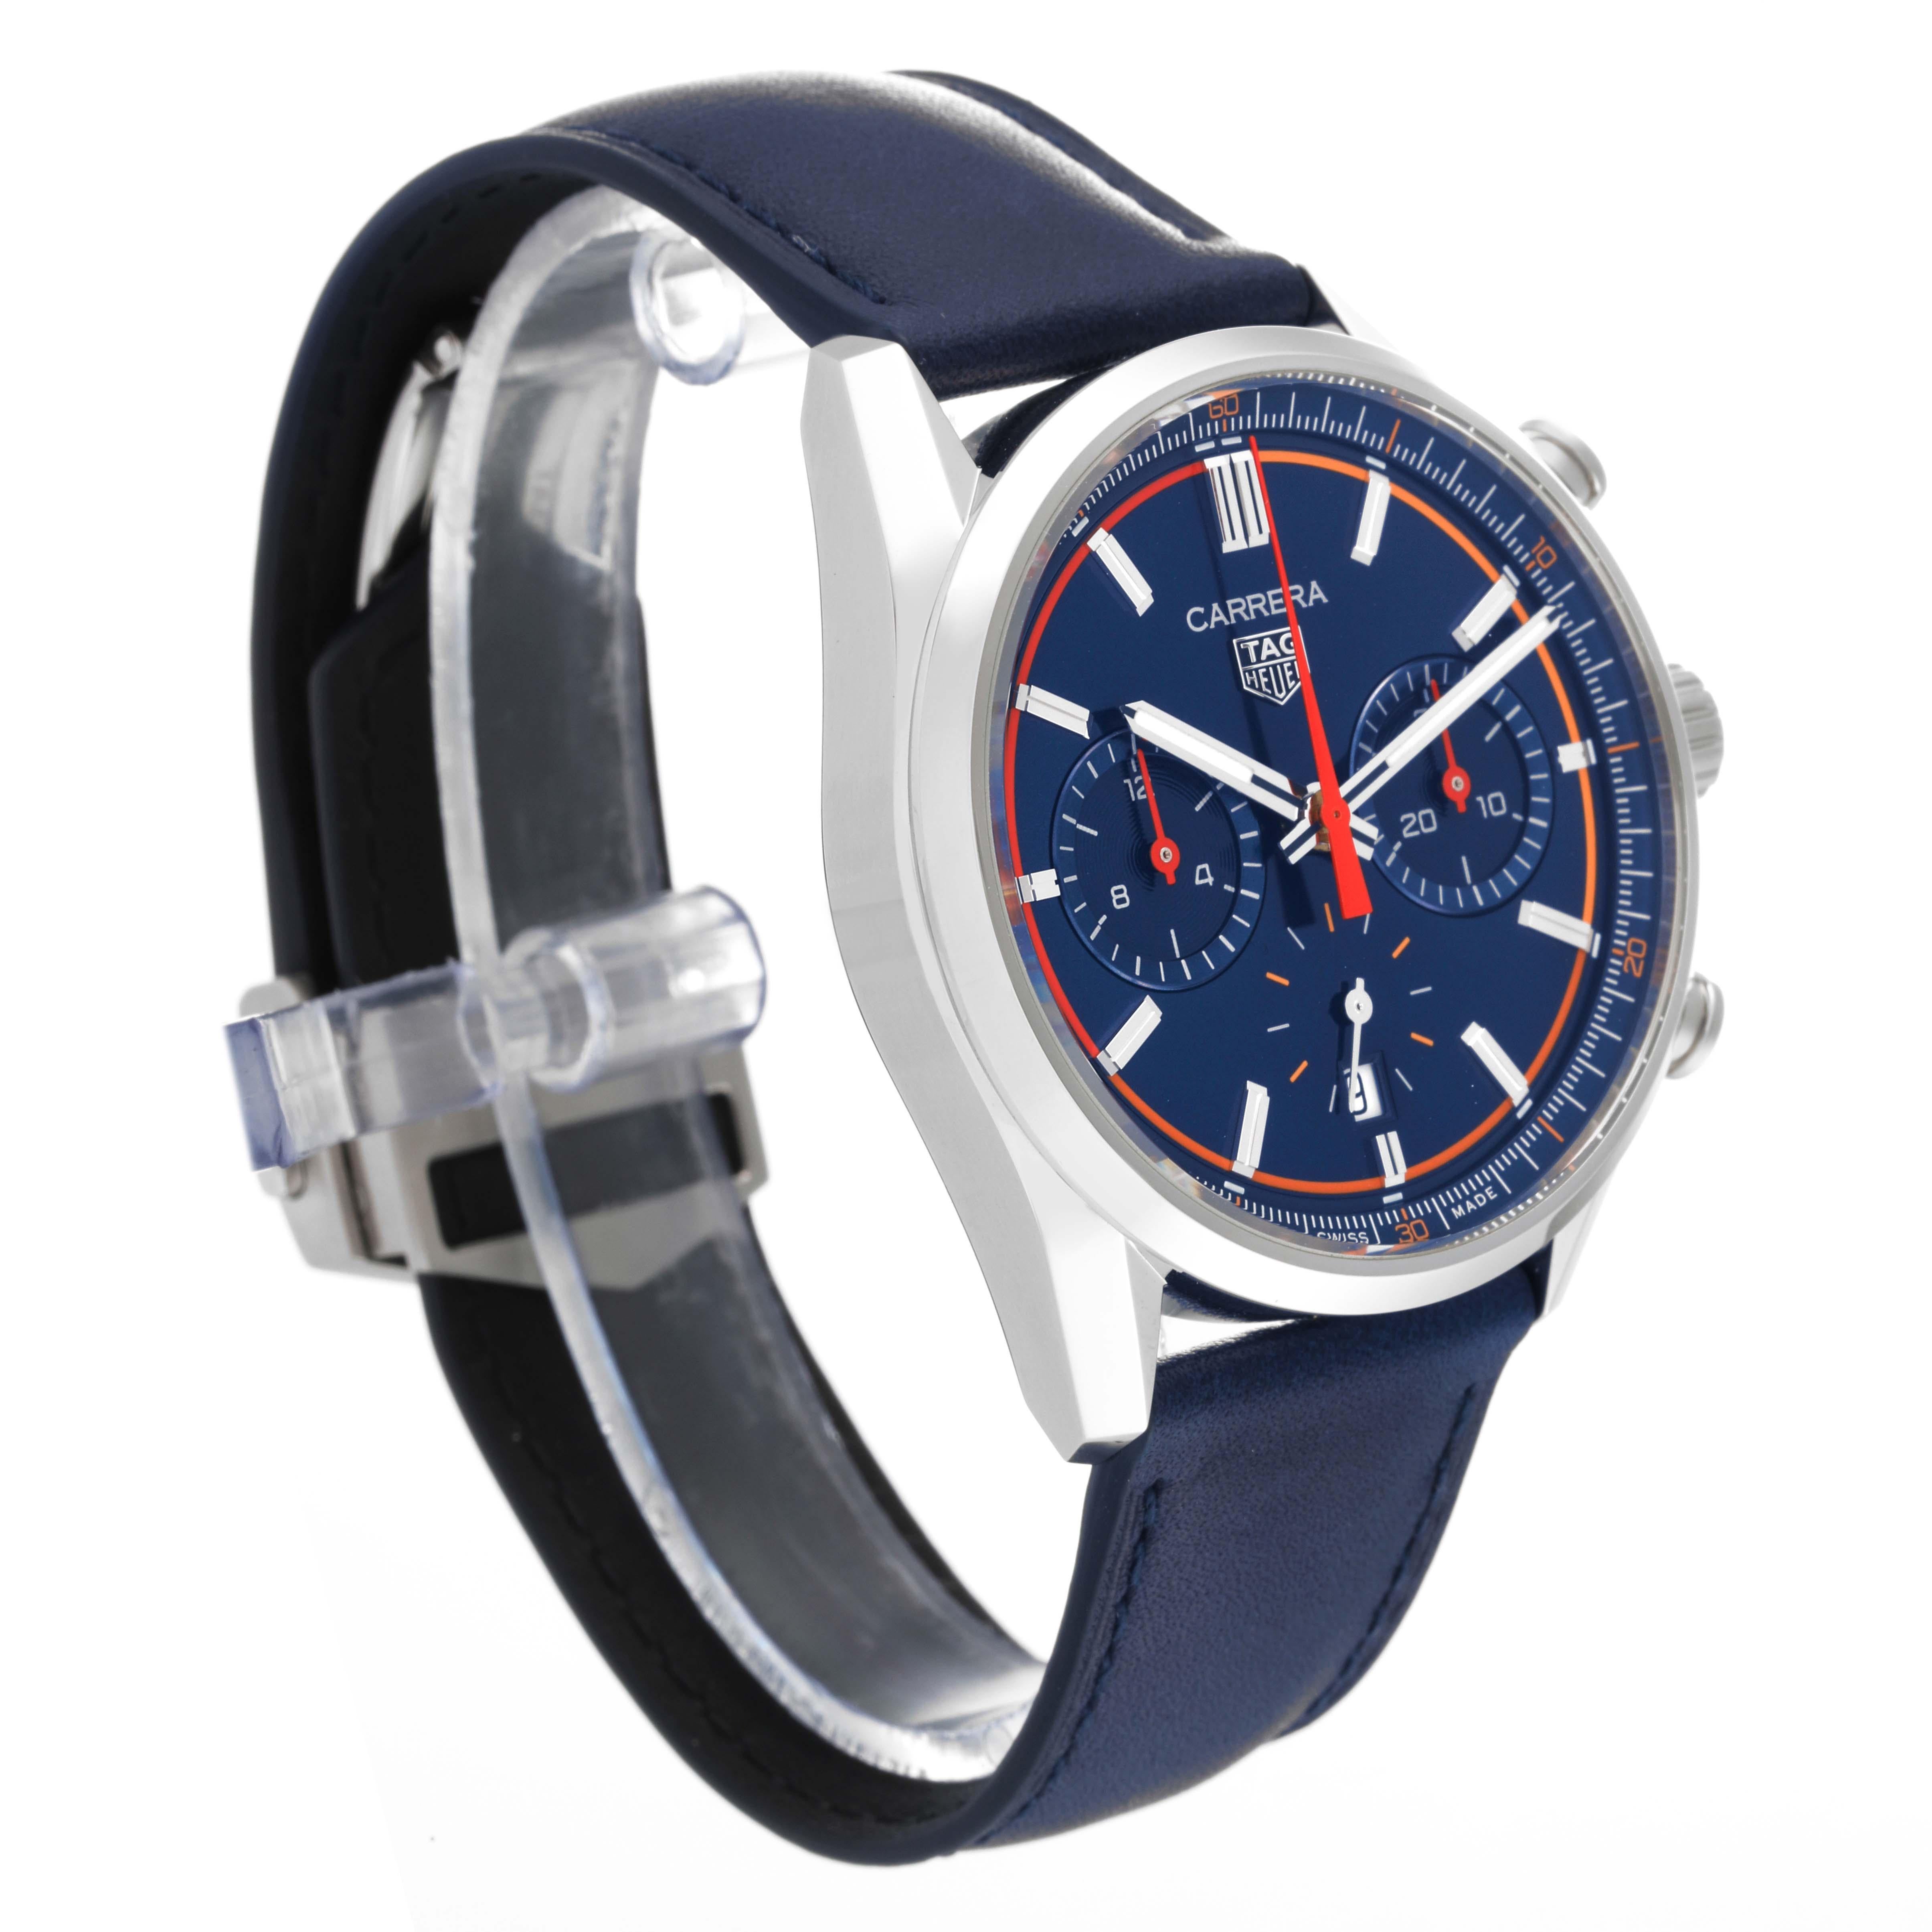 Tag Heuer Carrera Chronograph Blue Dial Steel Mens Watch CBN201D Unworn In Excellent Condition For Sale In Atlanta, GA